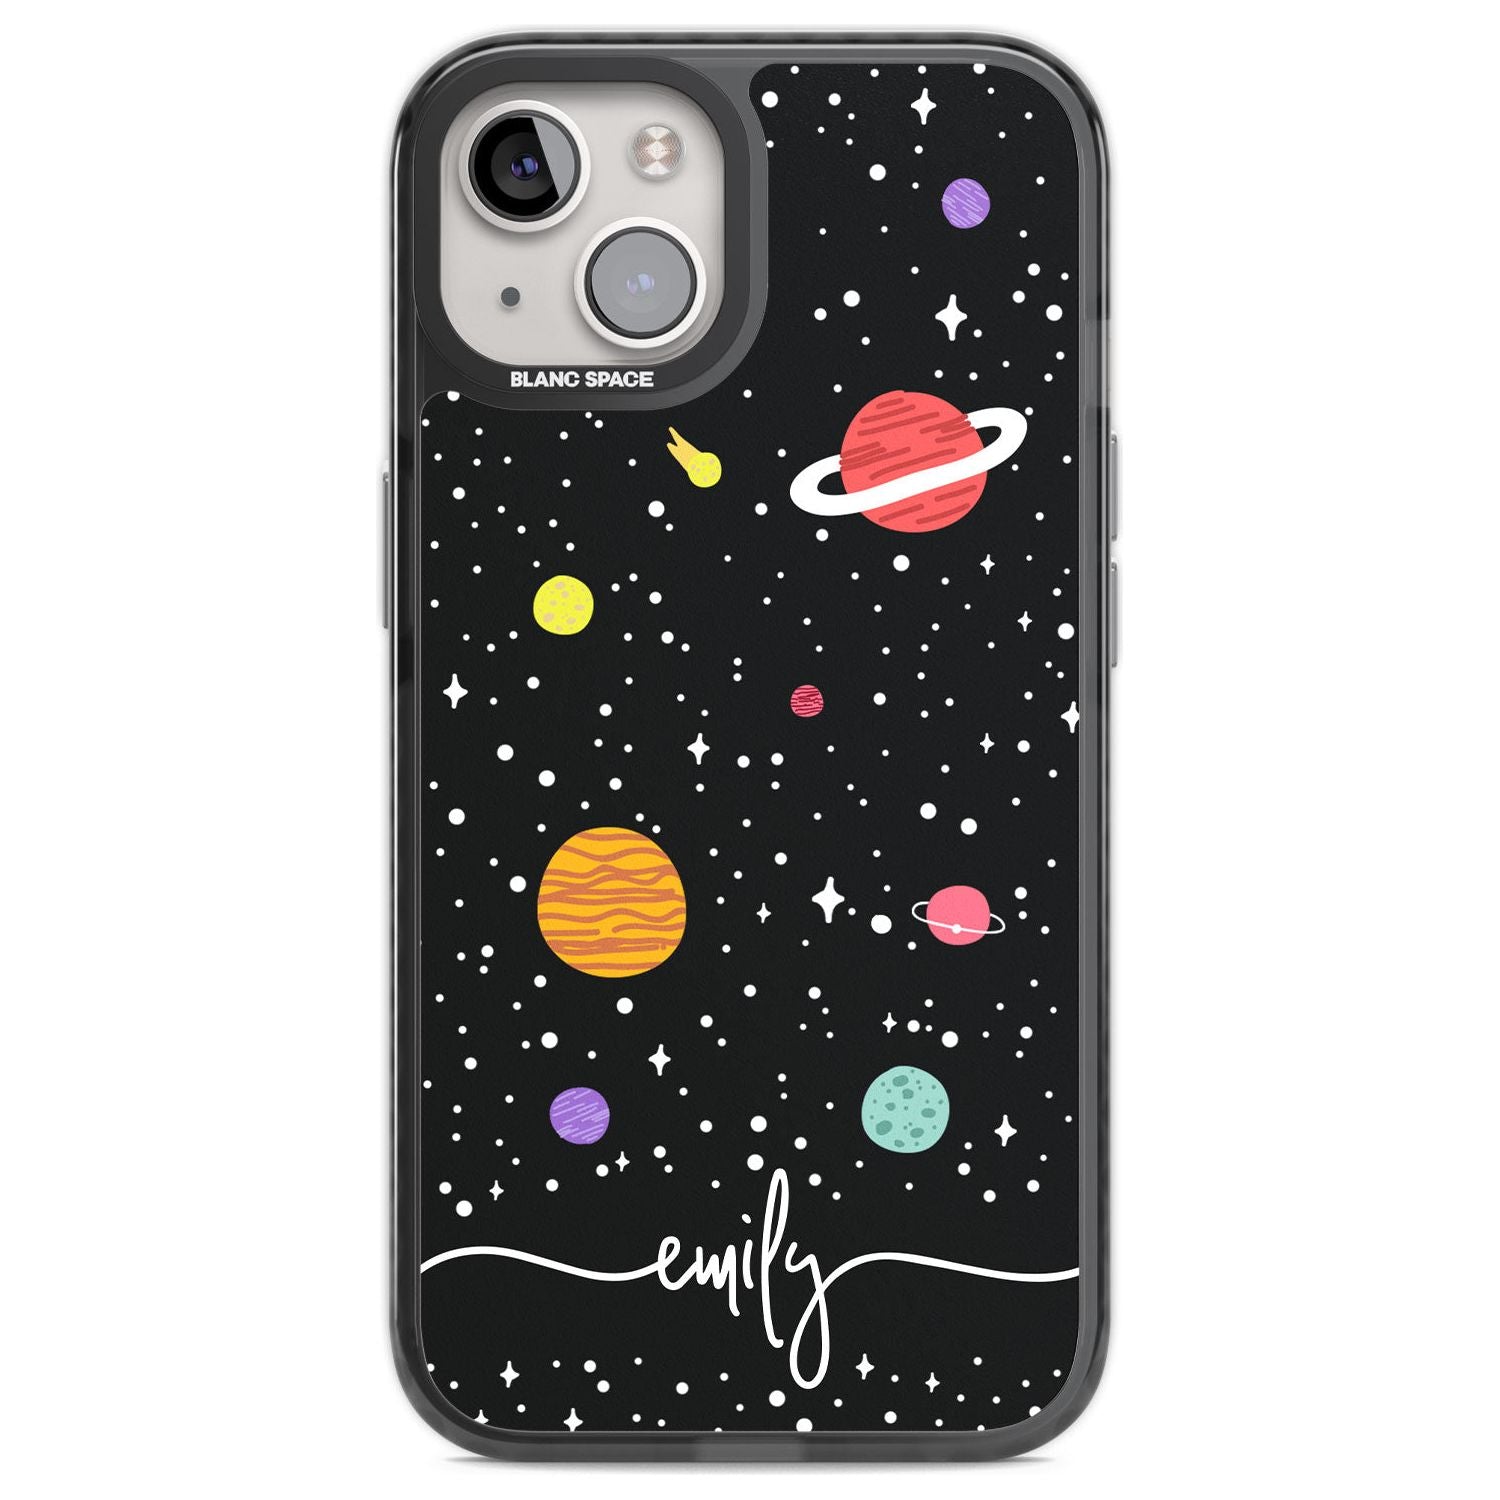 Personalised Cute Cartoon Planets Phone Case iPhone 12 / Black Impact Case,iPhone 13 / Black Impact Case,iPhone 12 Pro / Black Impact Case,iPhone 14 / Black Impact Case,iPhone 15 Plus / Black Impact Case,iPhone 15 / Black Impact Case Blanc Space